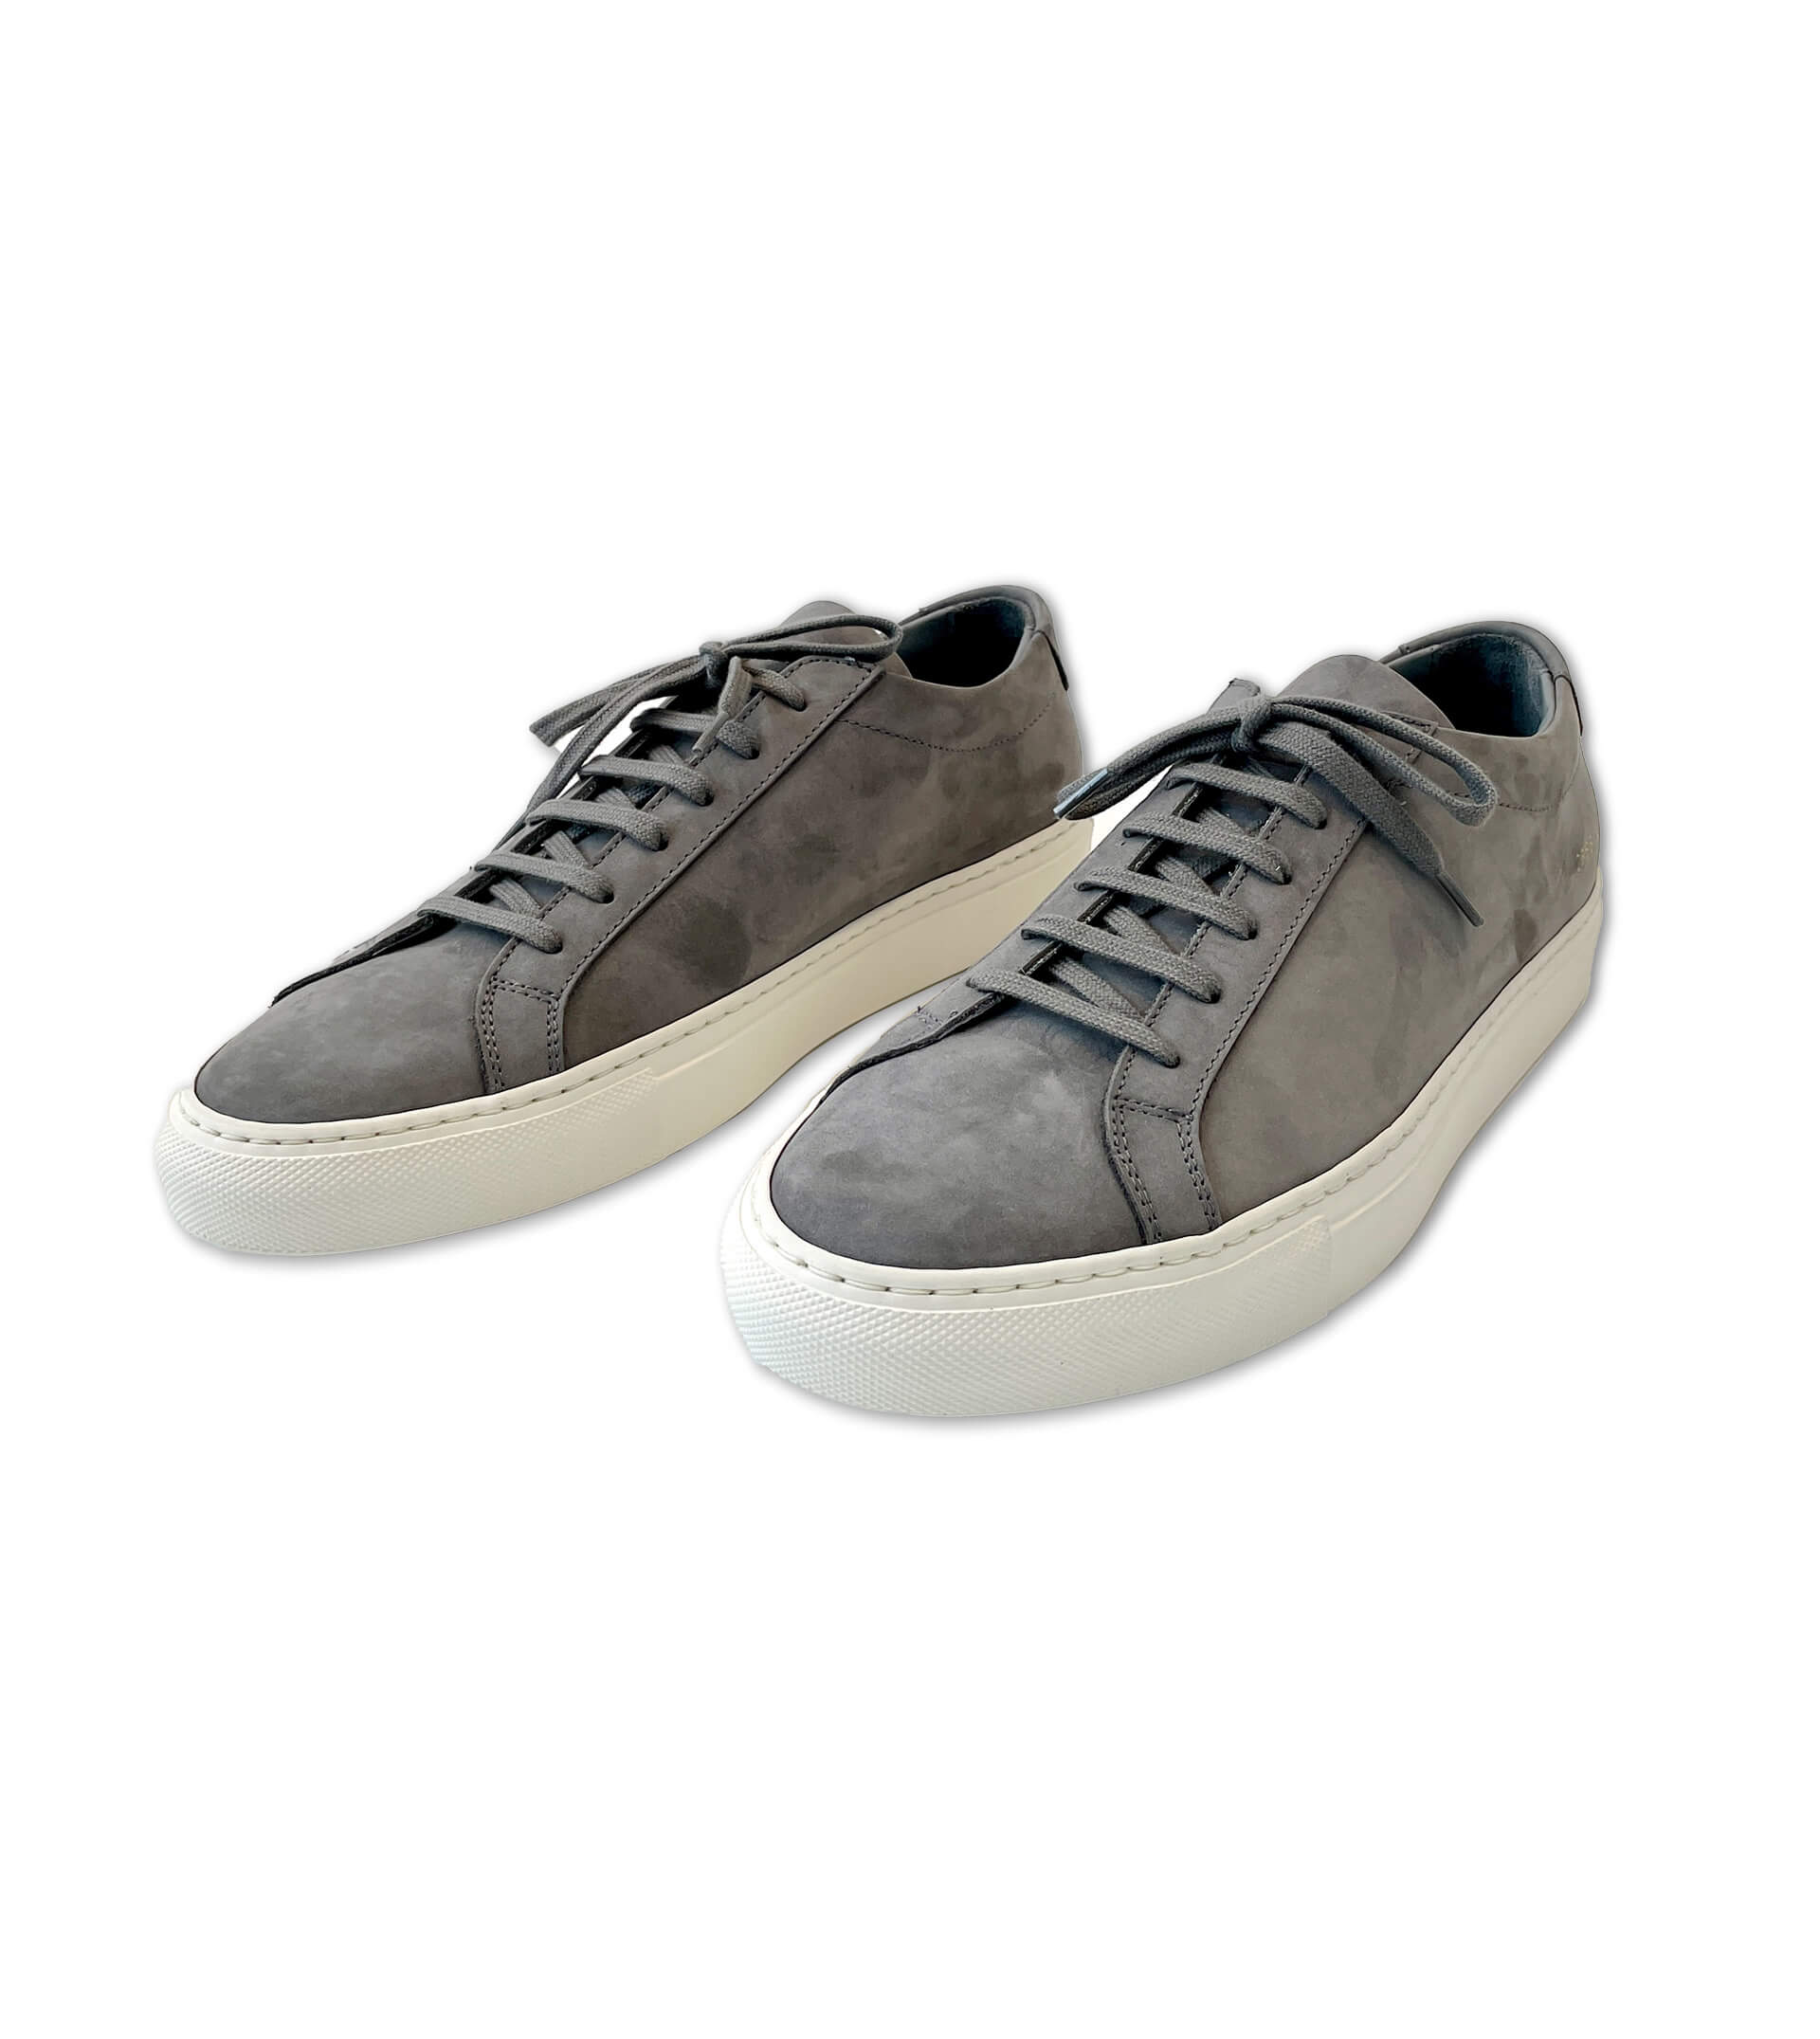 COMMON PROJECTS Original Achilles Low in Nubuck